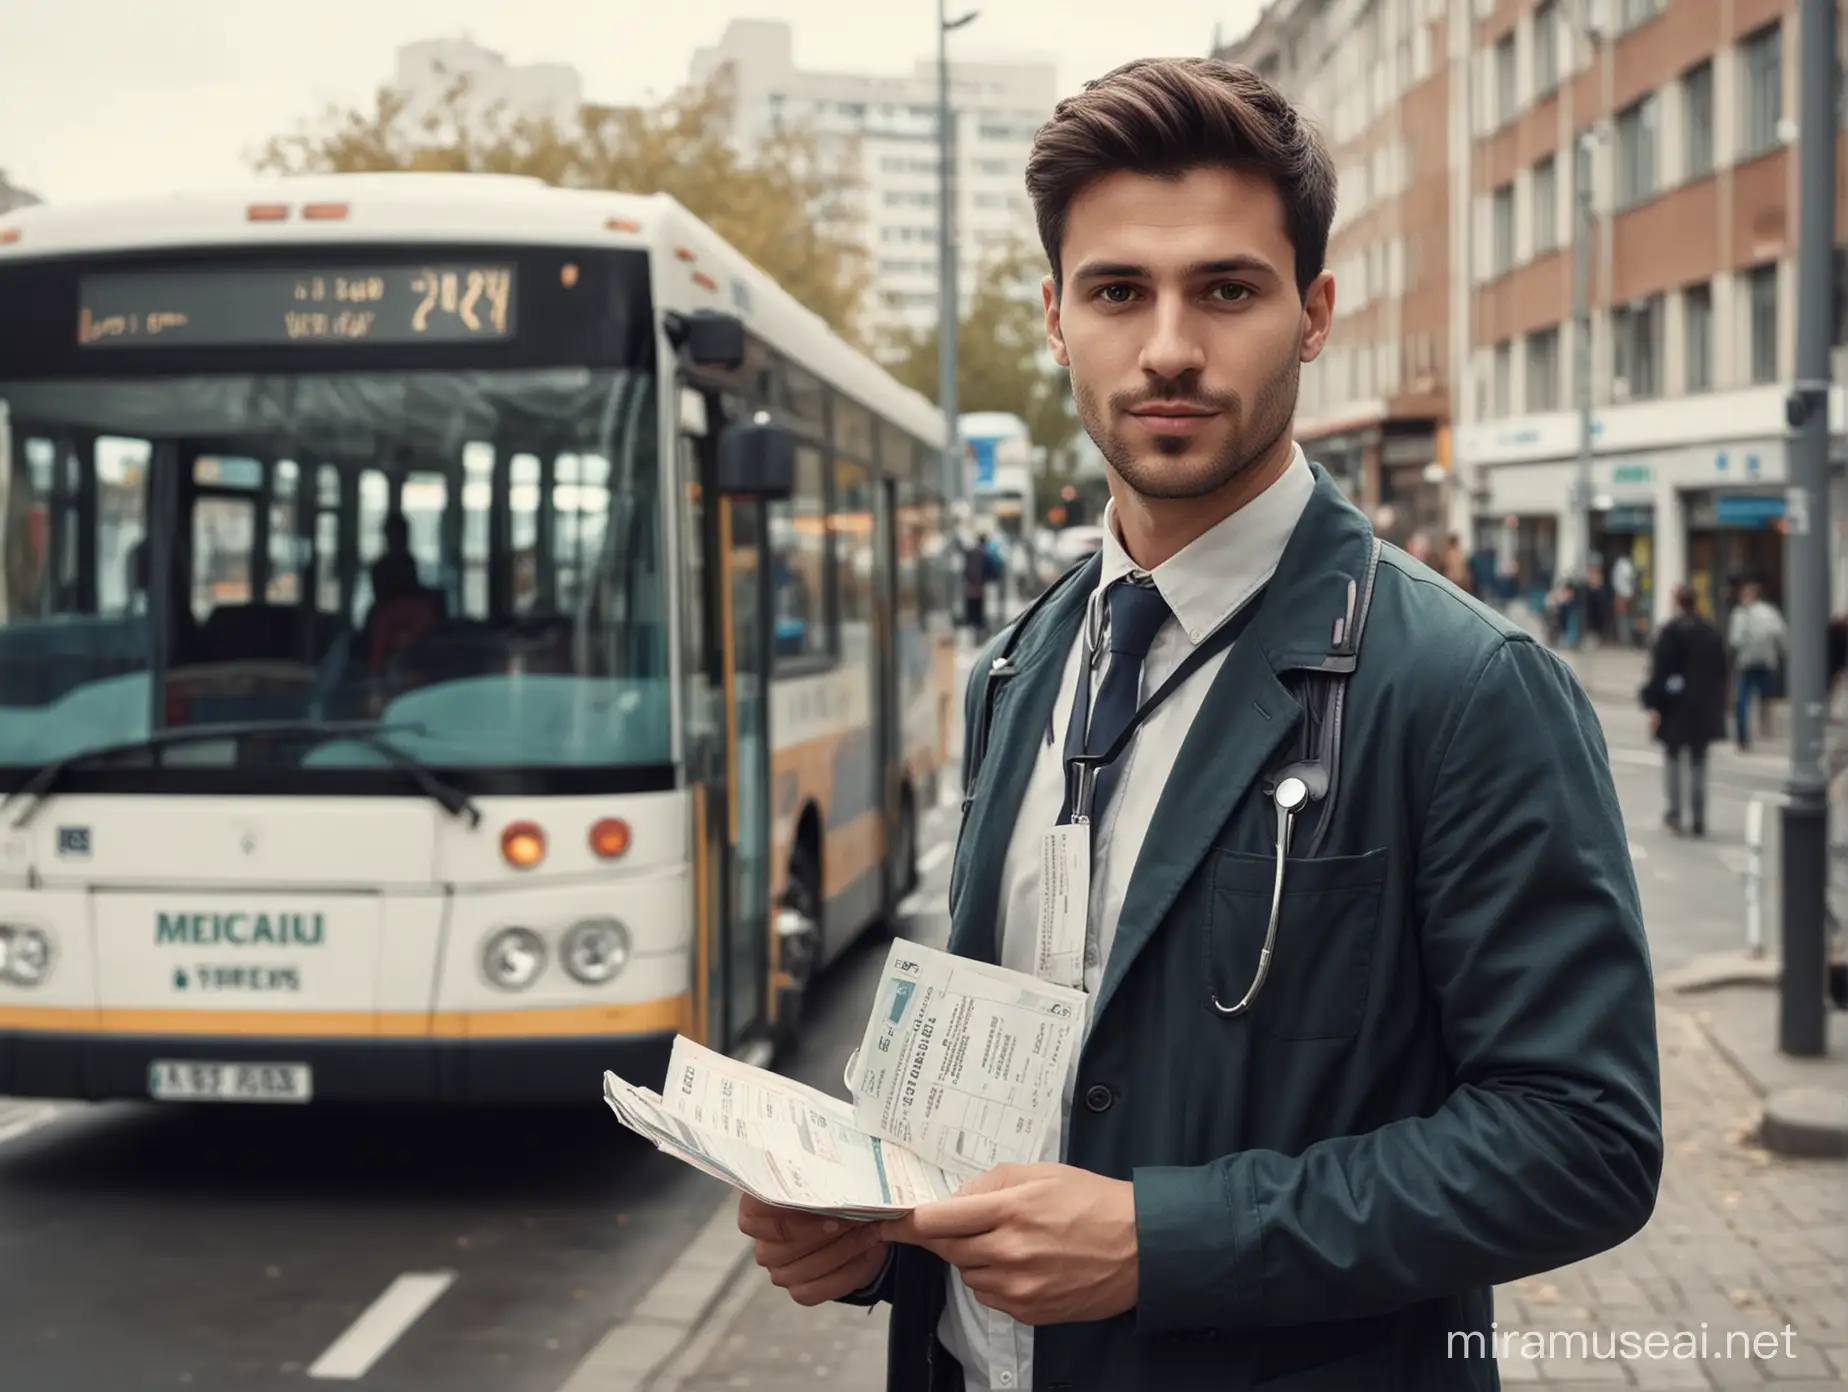 Young Medical Student Waiting at Bus Stop with Stethoscope and Ticket